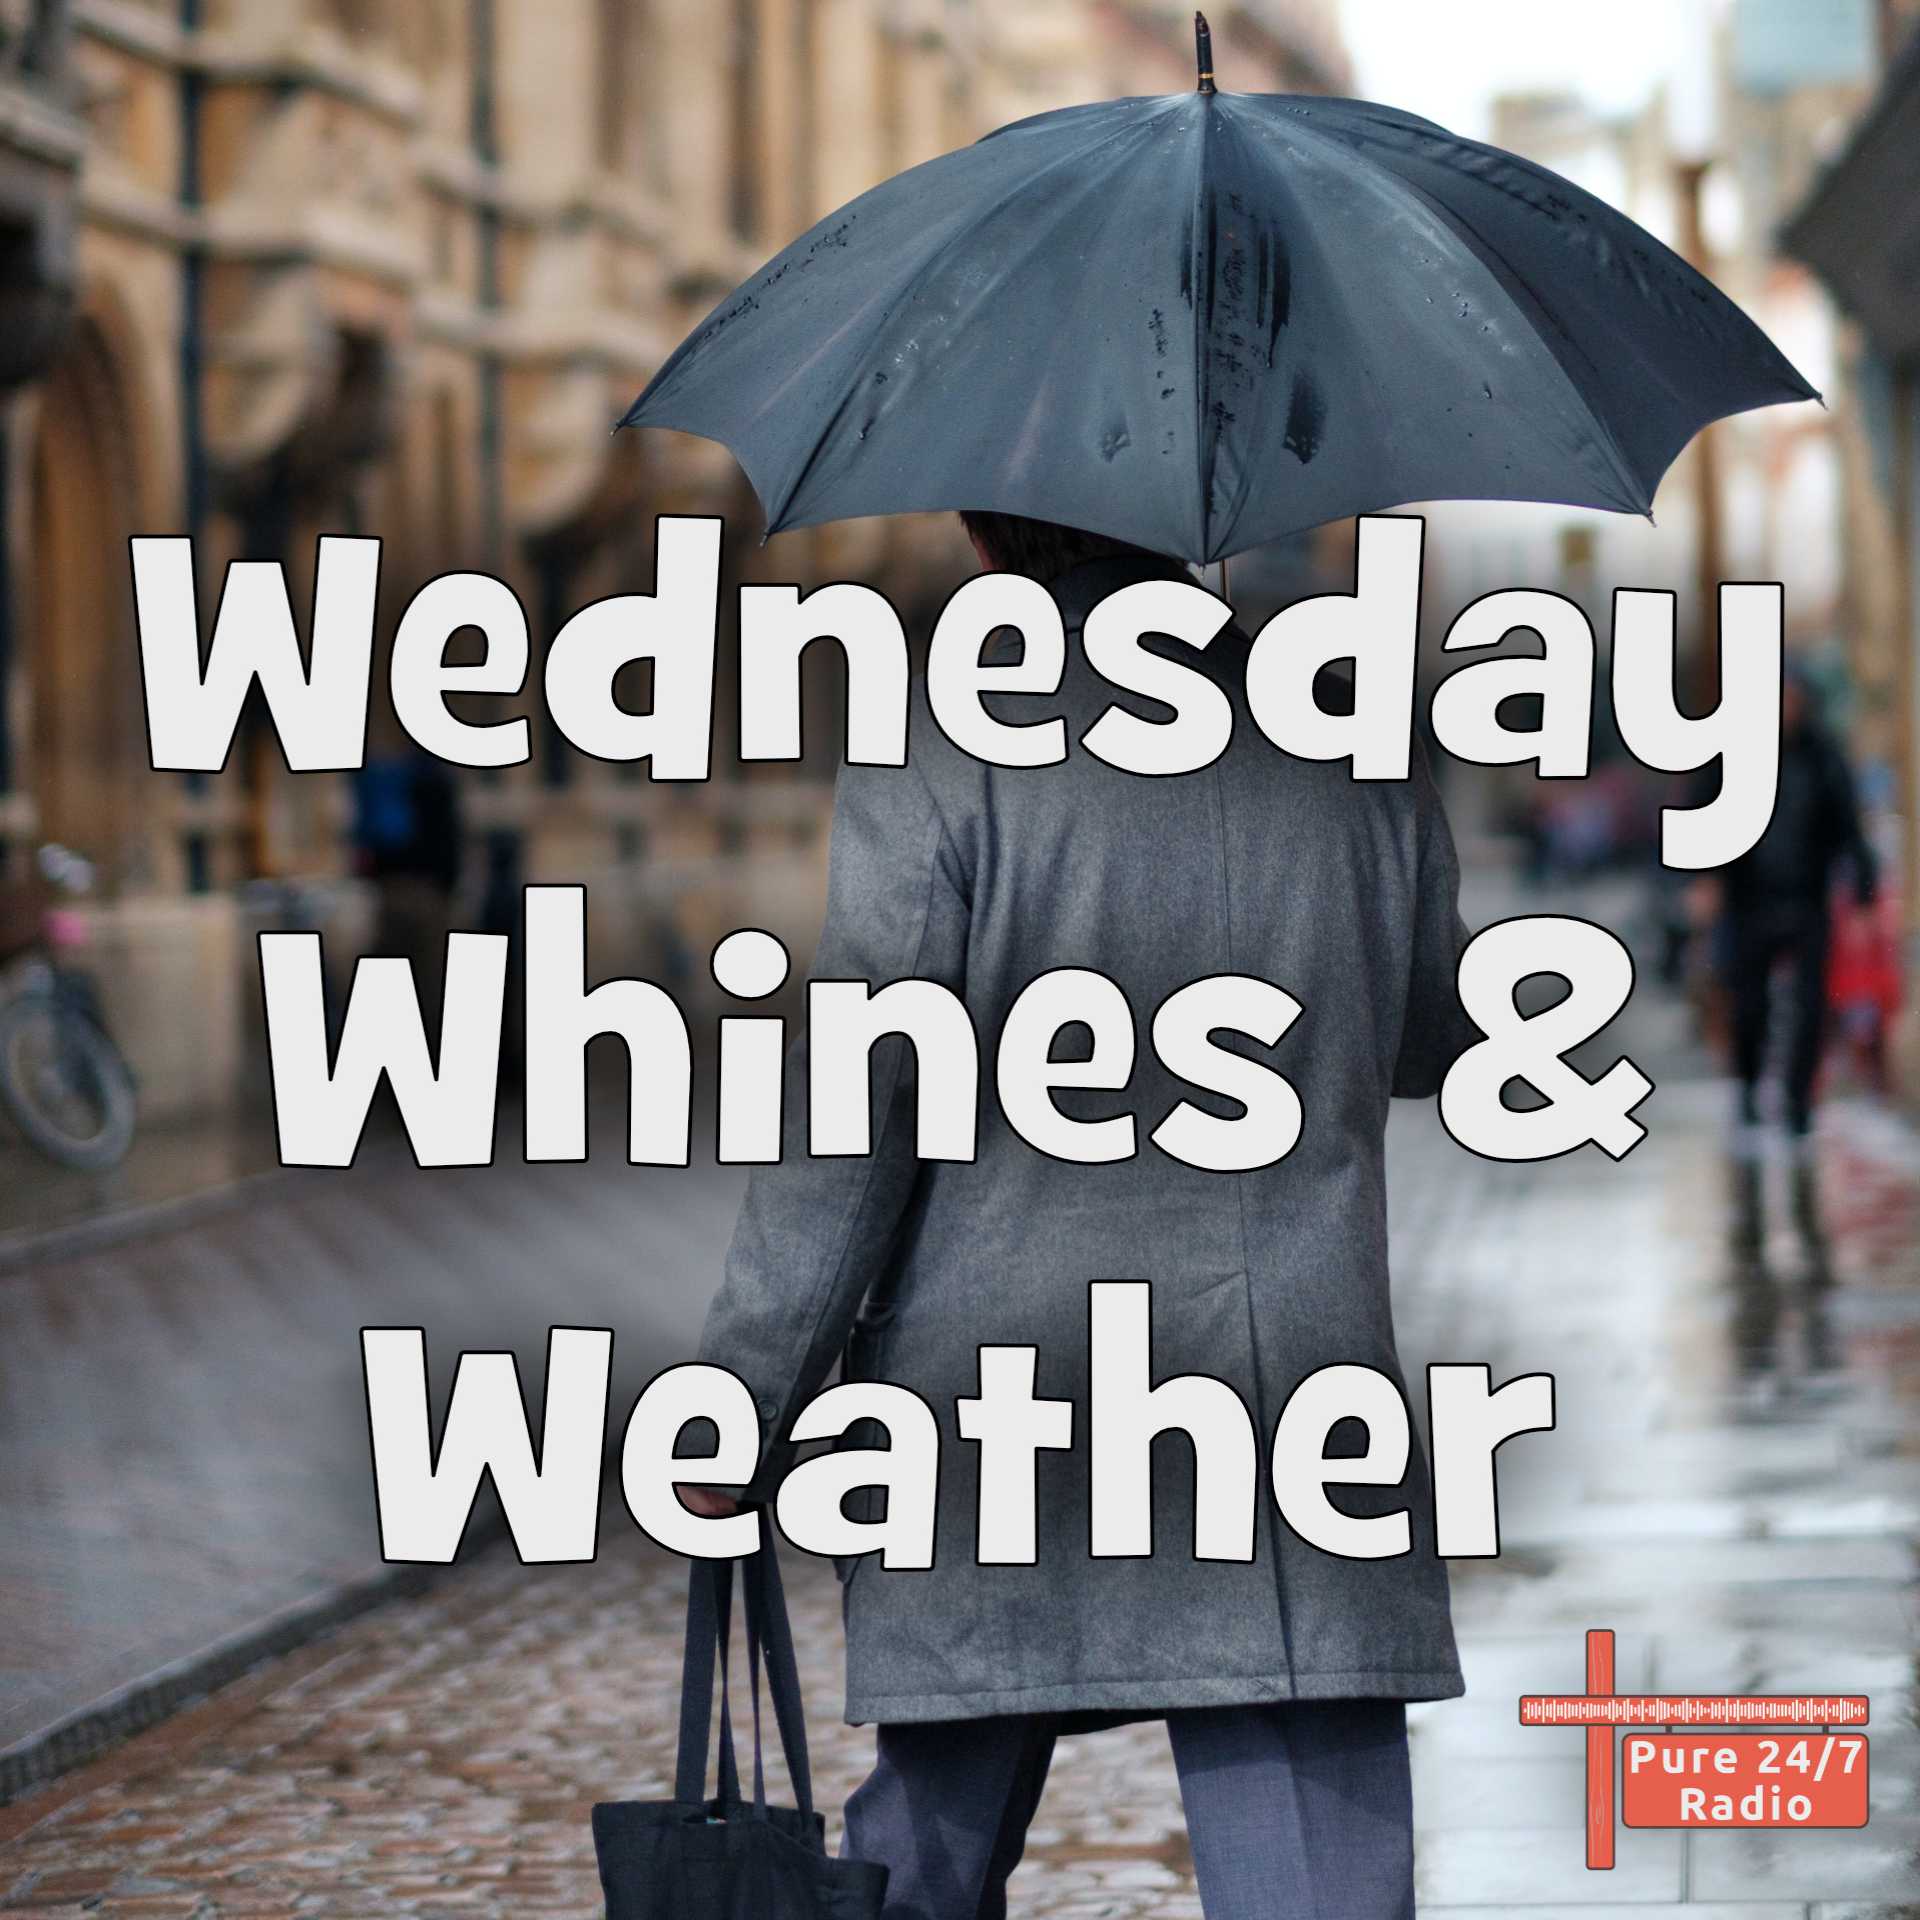 Wednesday Whines and Weather